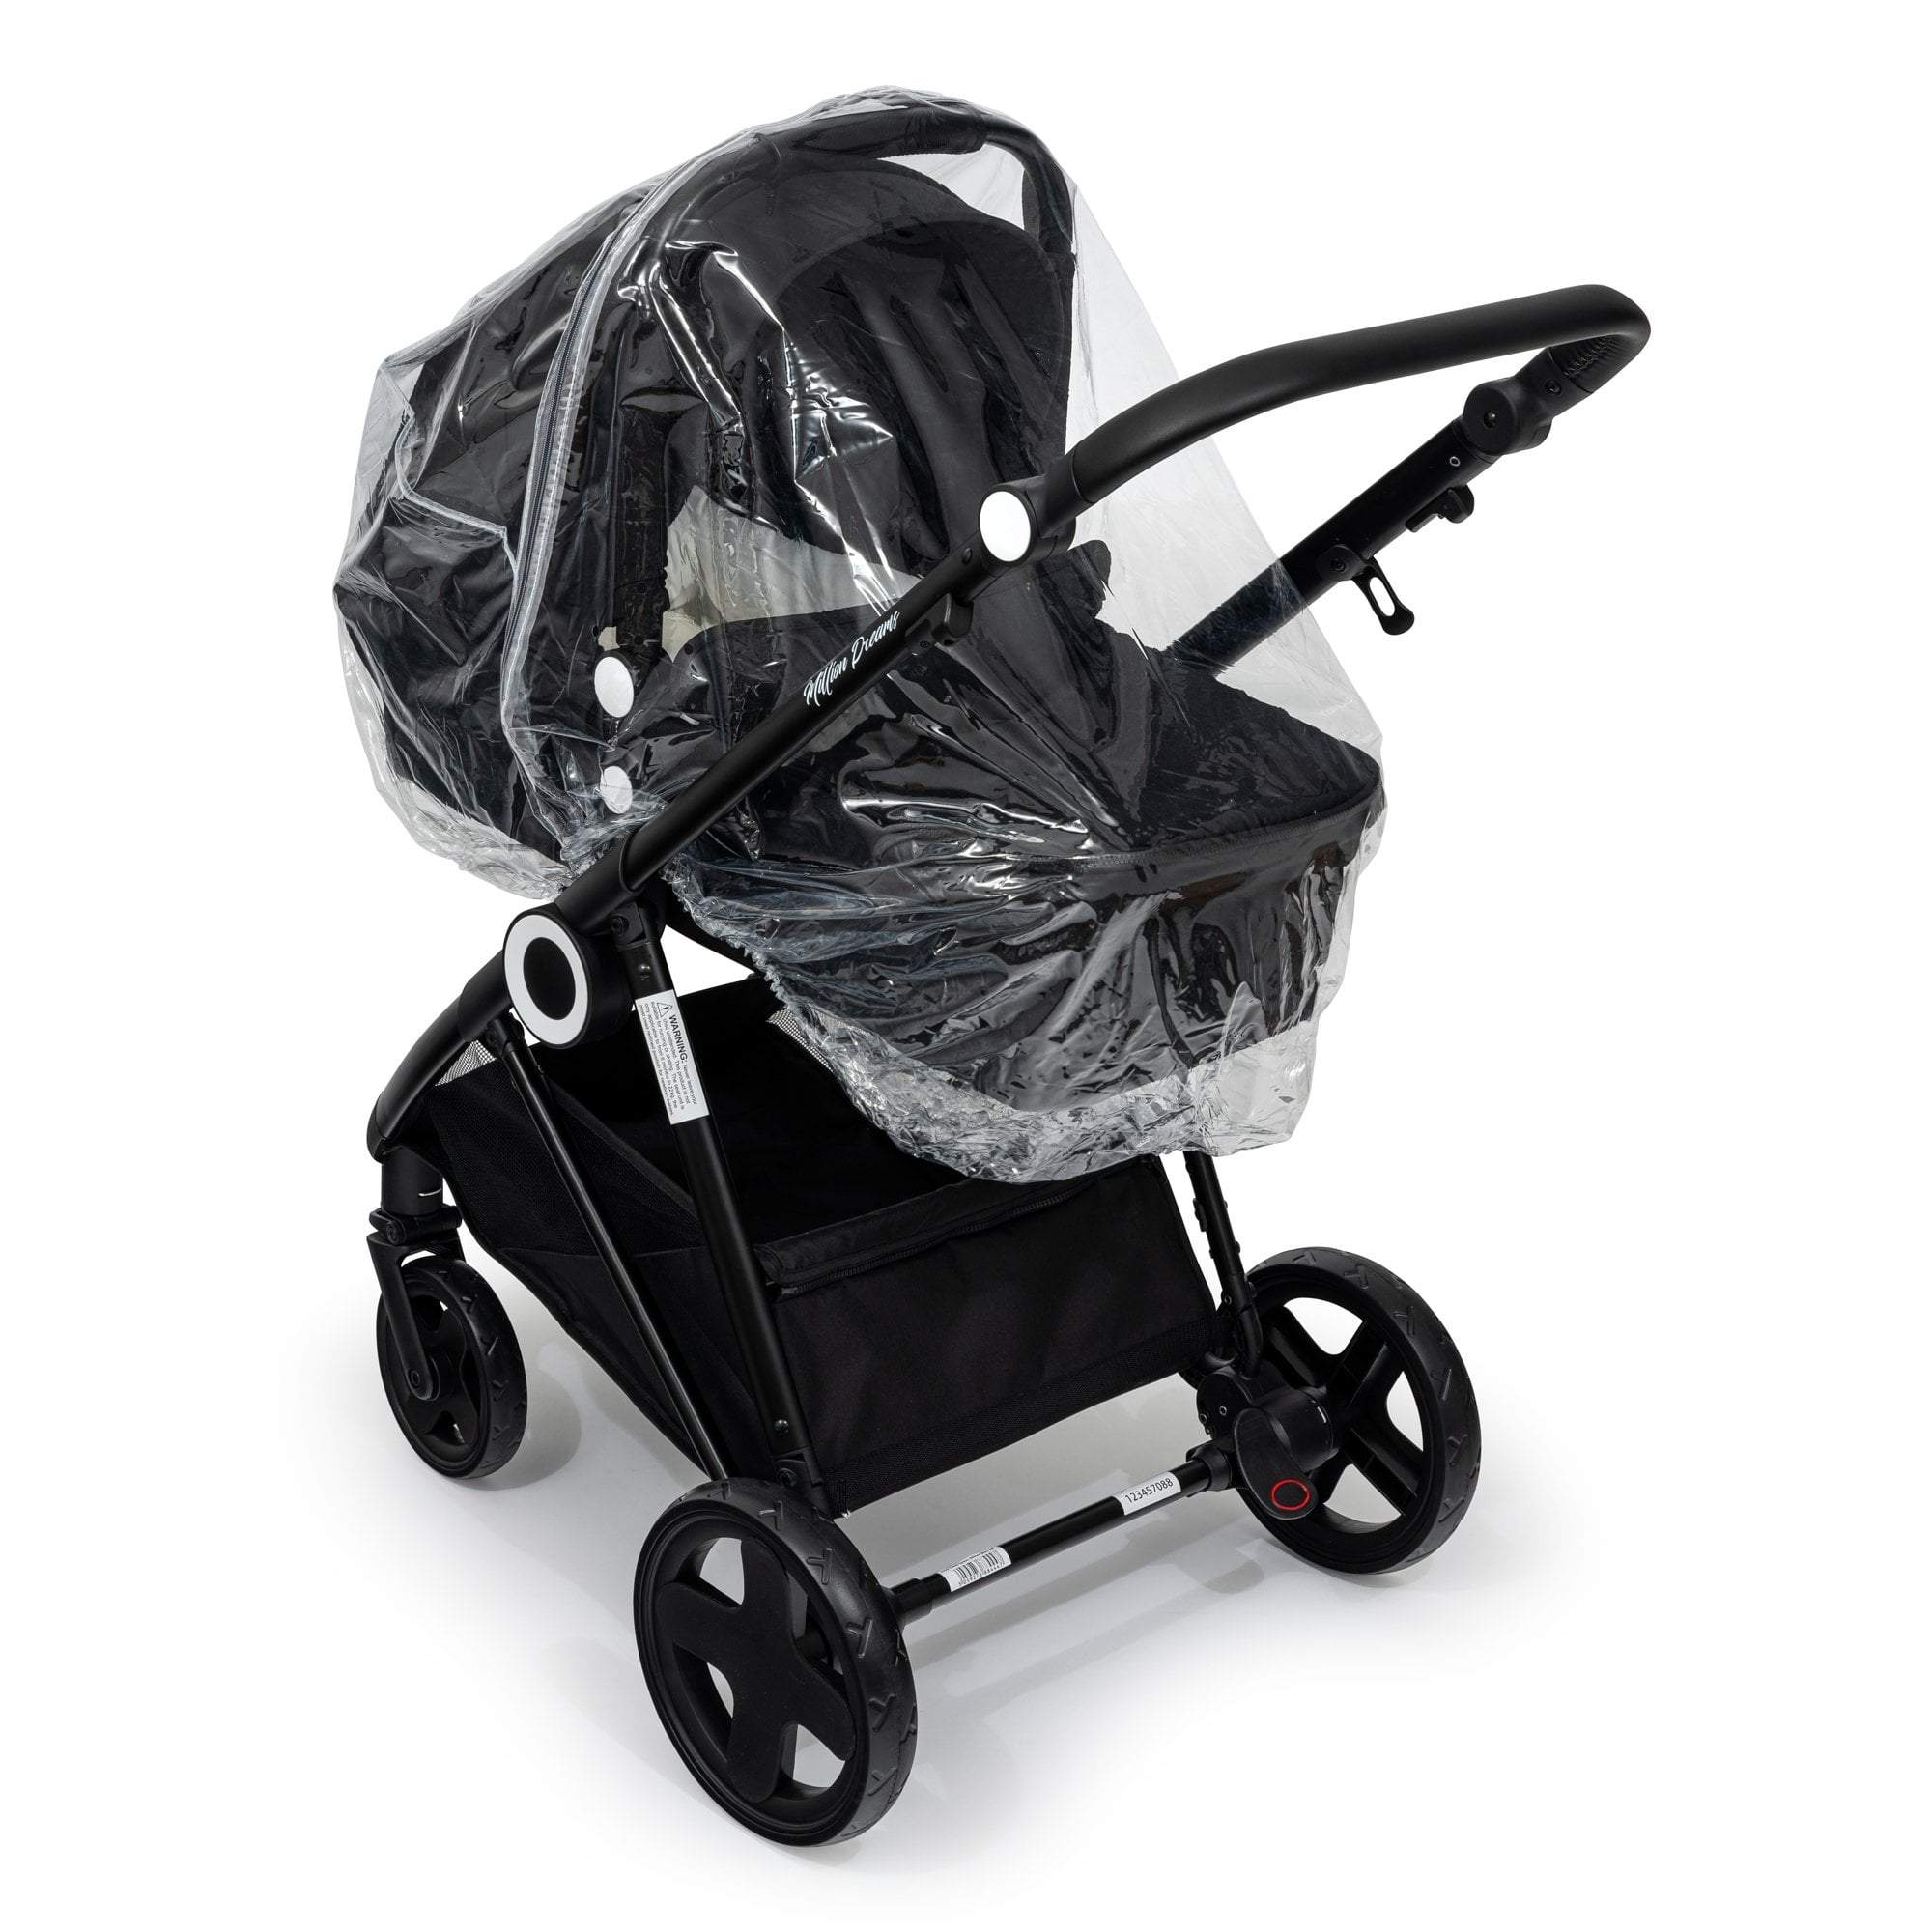 Carrycot Raincover Compatible With Emmaljunga - Fits All Models - For Your Little One